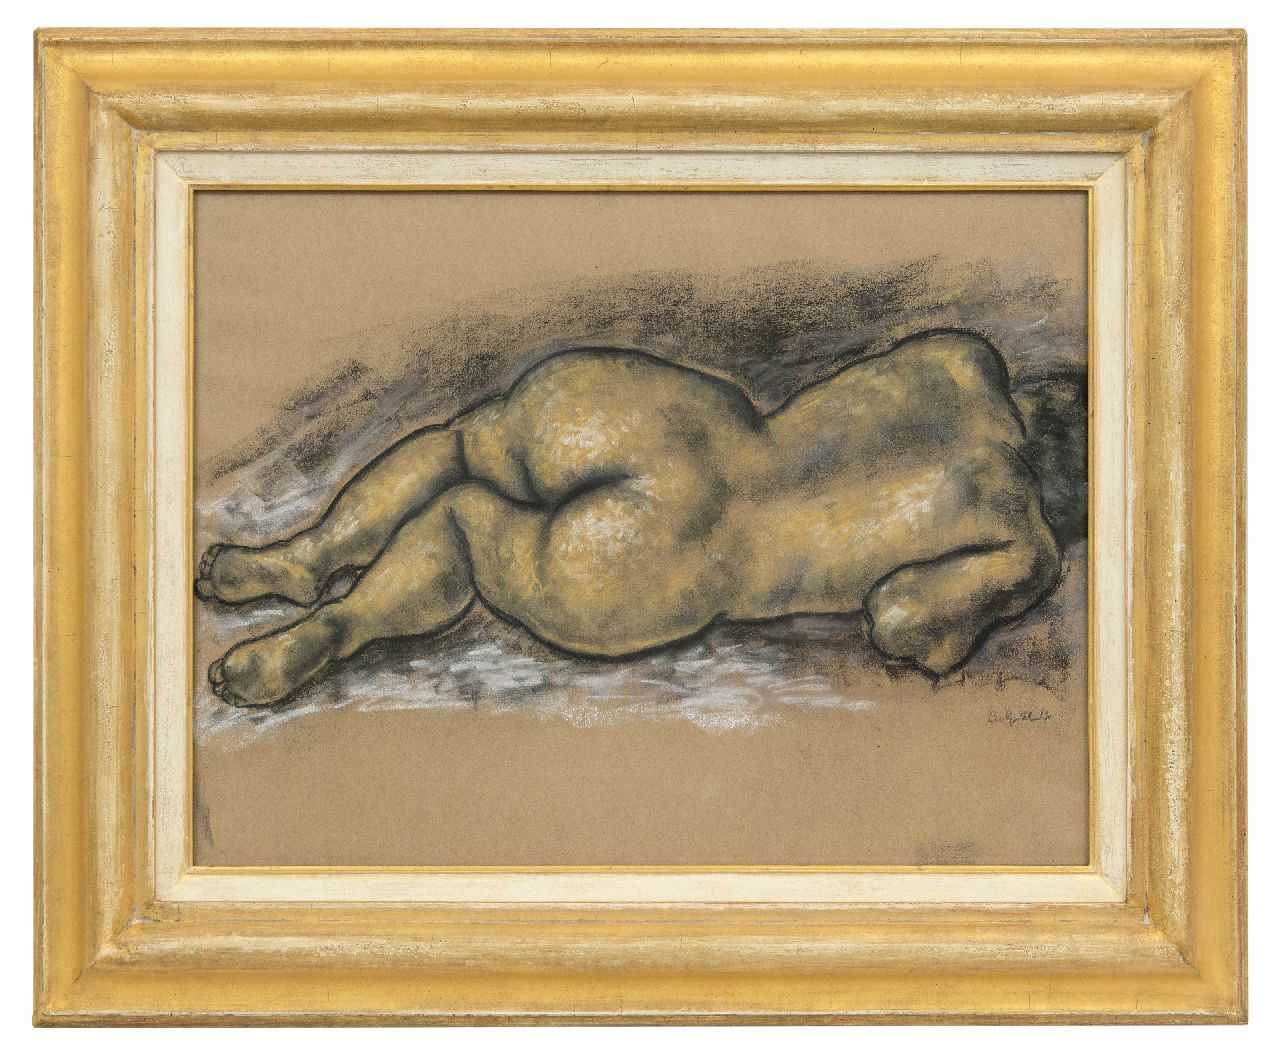 Gestel L.  | Leendert 'Leo' Gestel | Watercolours and drawings offered for sale | Reclining nude, charcoal and pastel on paper 47.0 x 62.5 cm, signed l.r. and dated '31